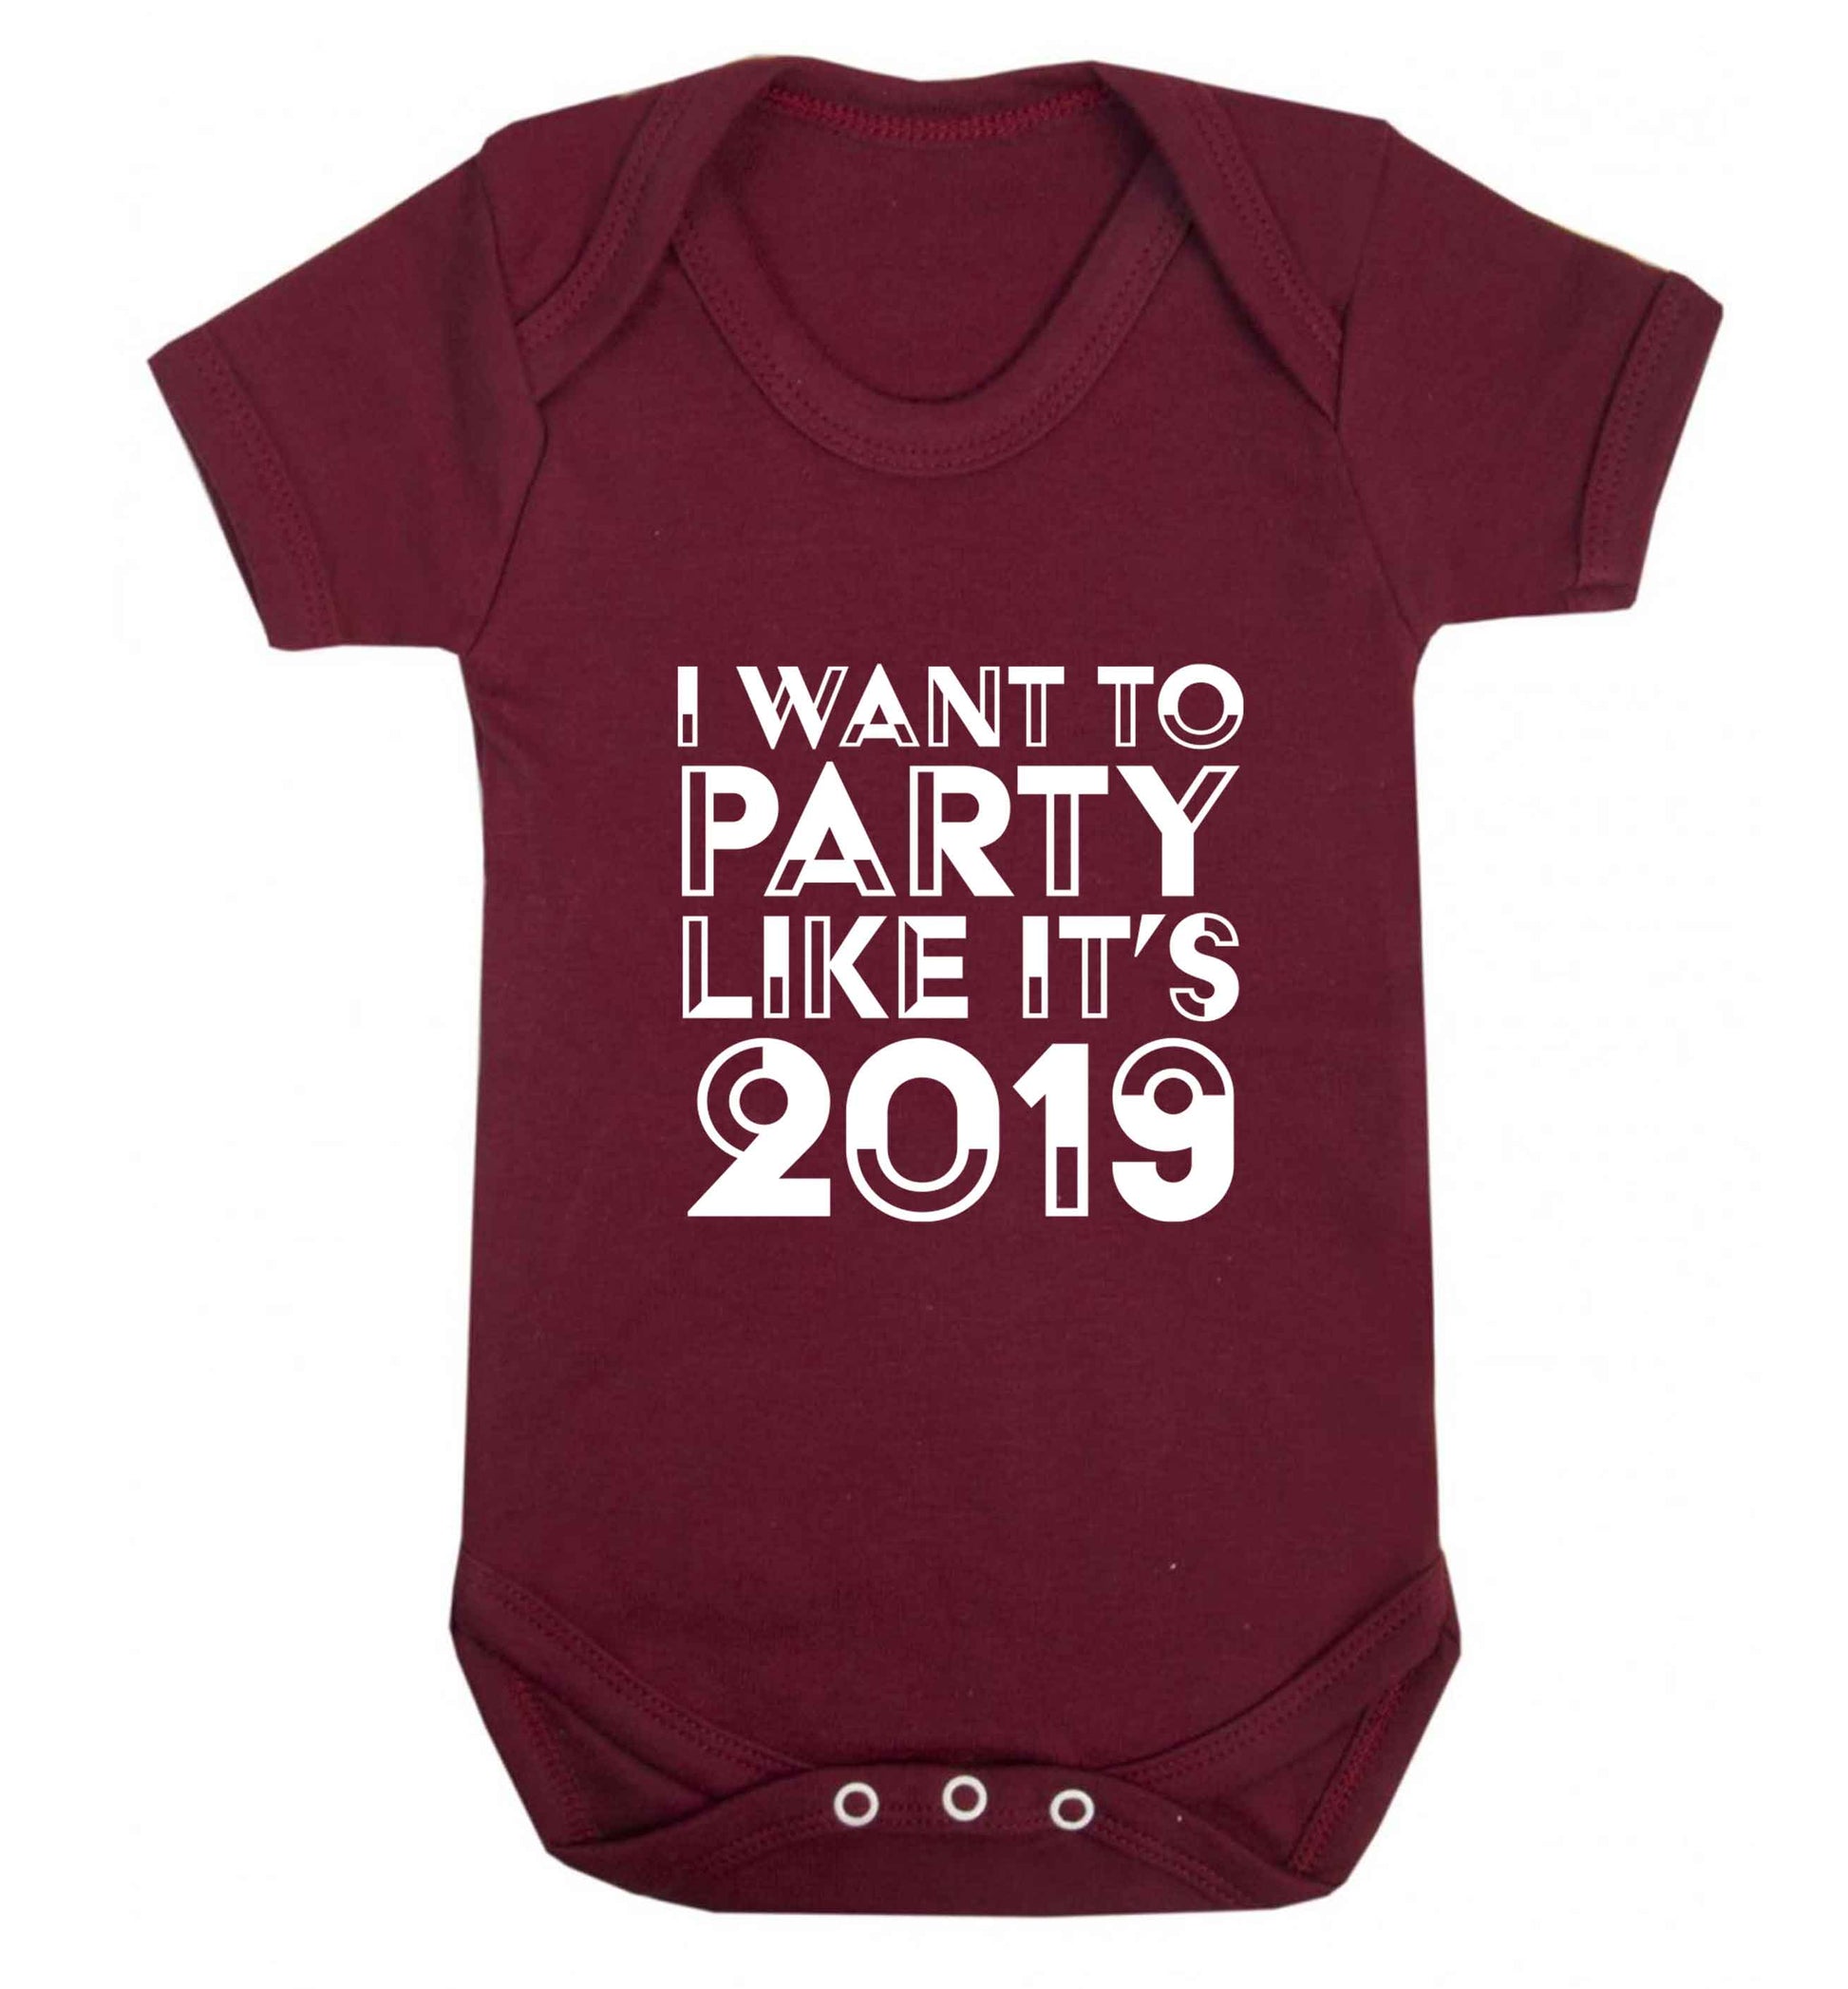 I want to party like it's 2019 baby vest maroon 18-24 months